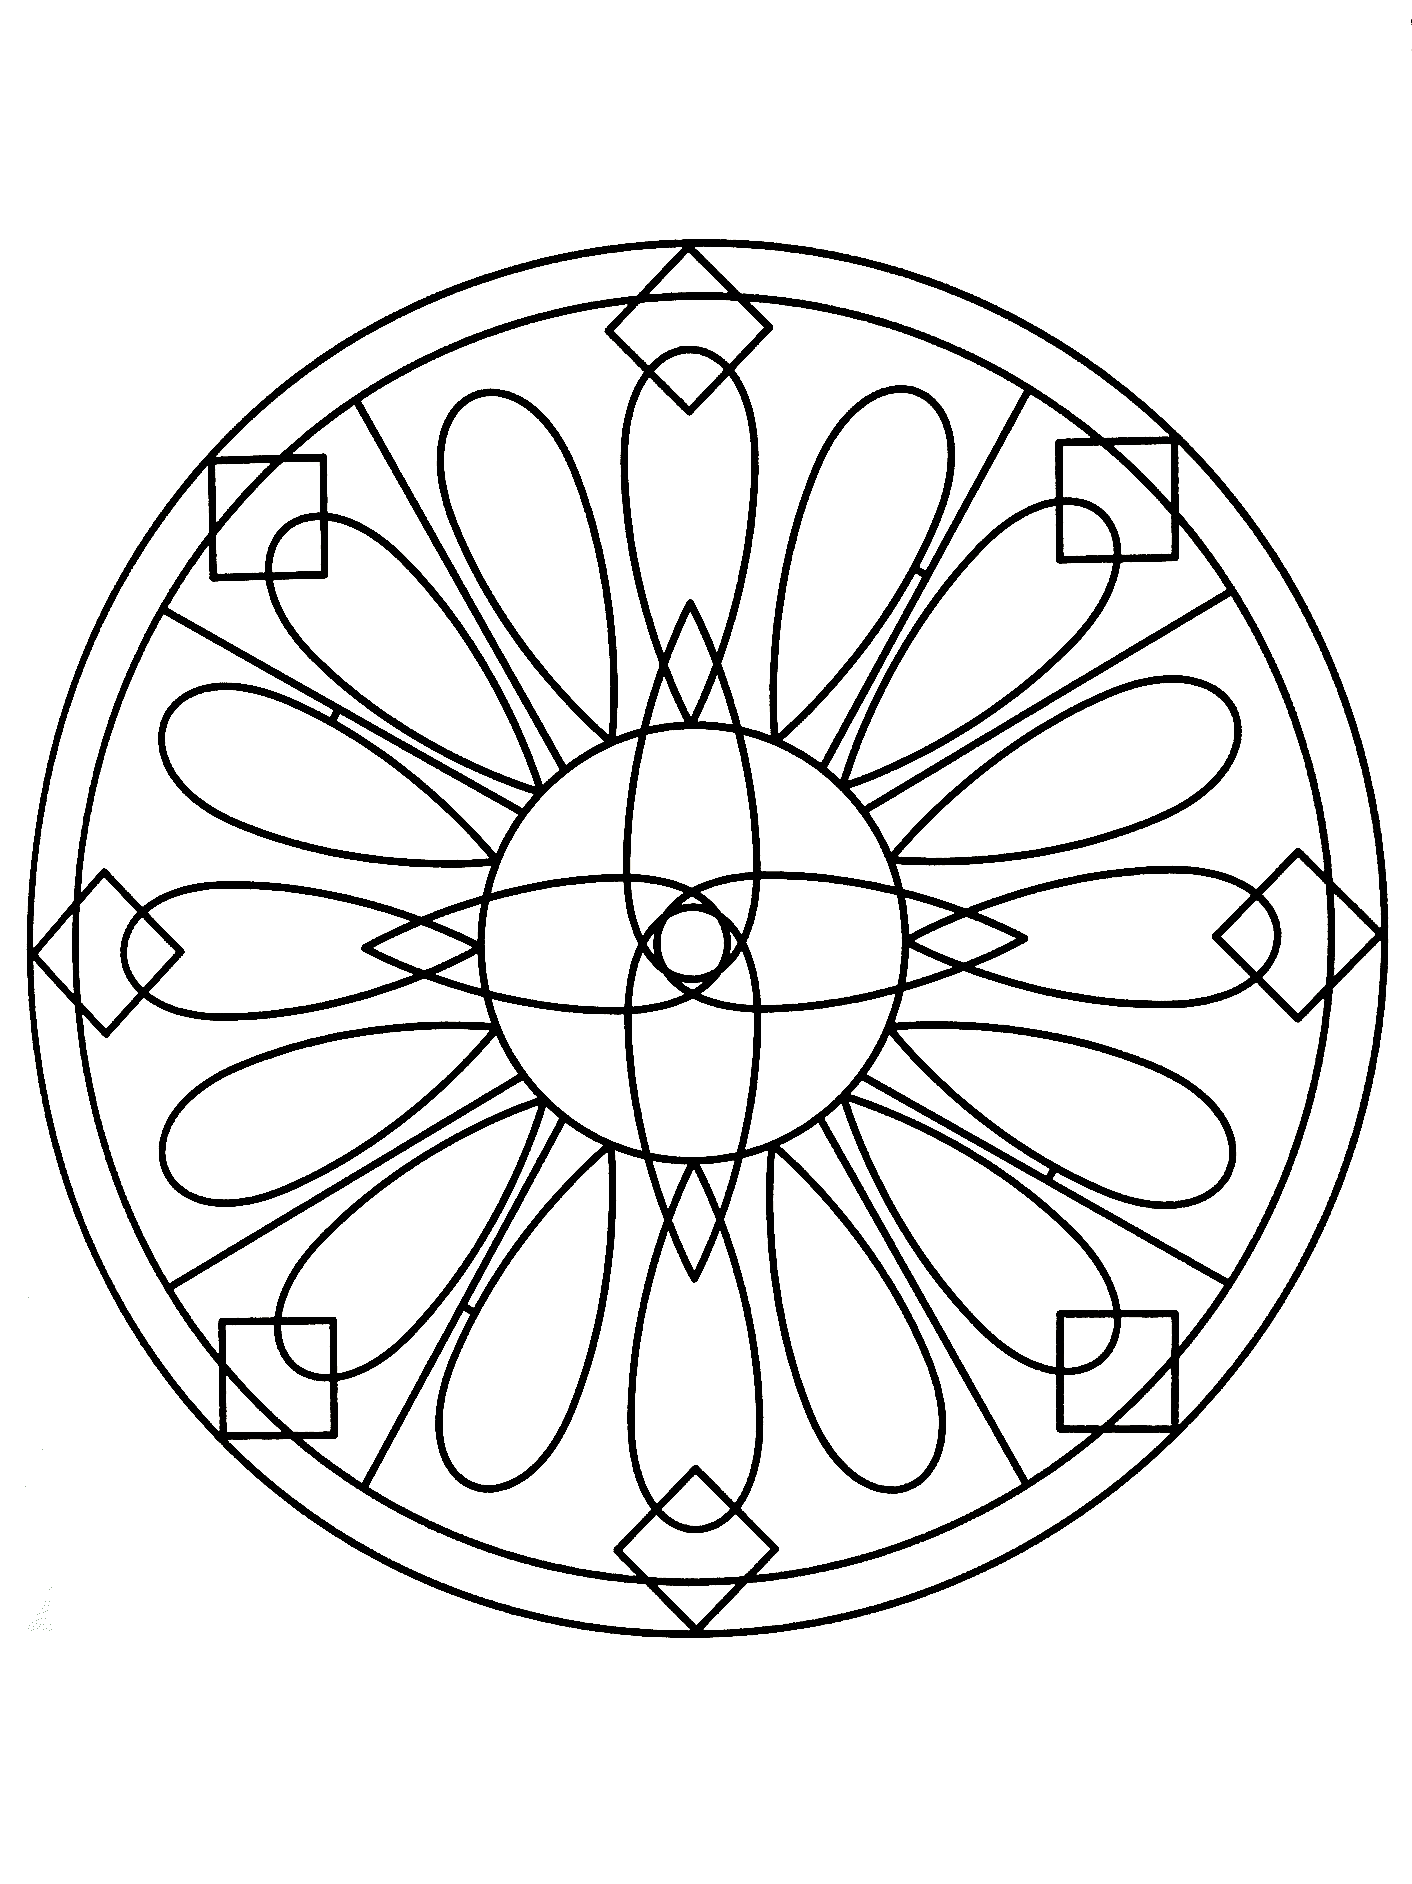 simple mandalas to color simple mandala coloring pages download and print for free color simple mandalas to 